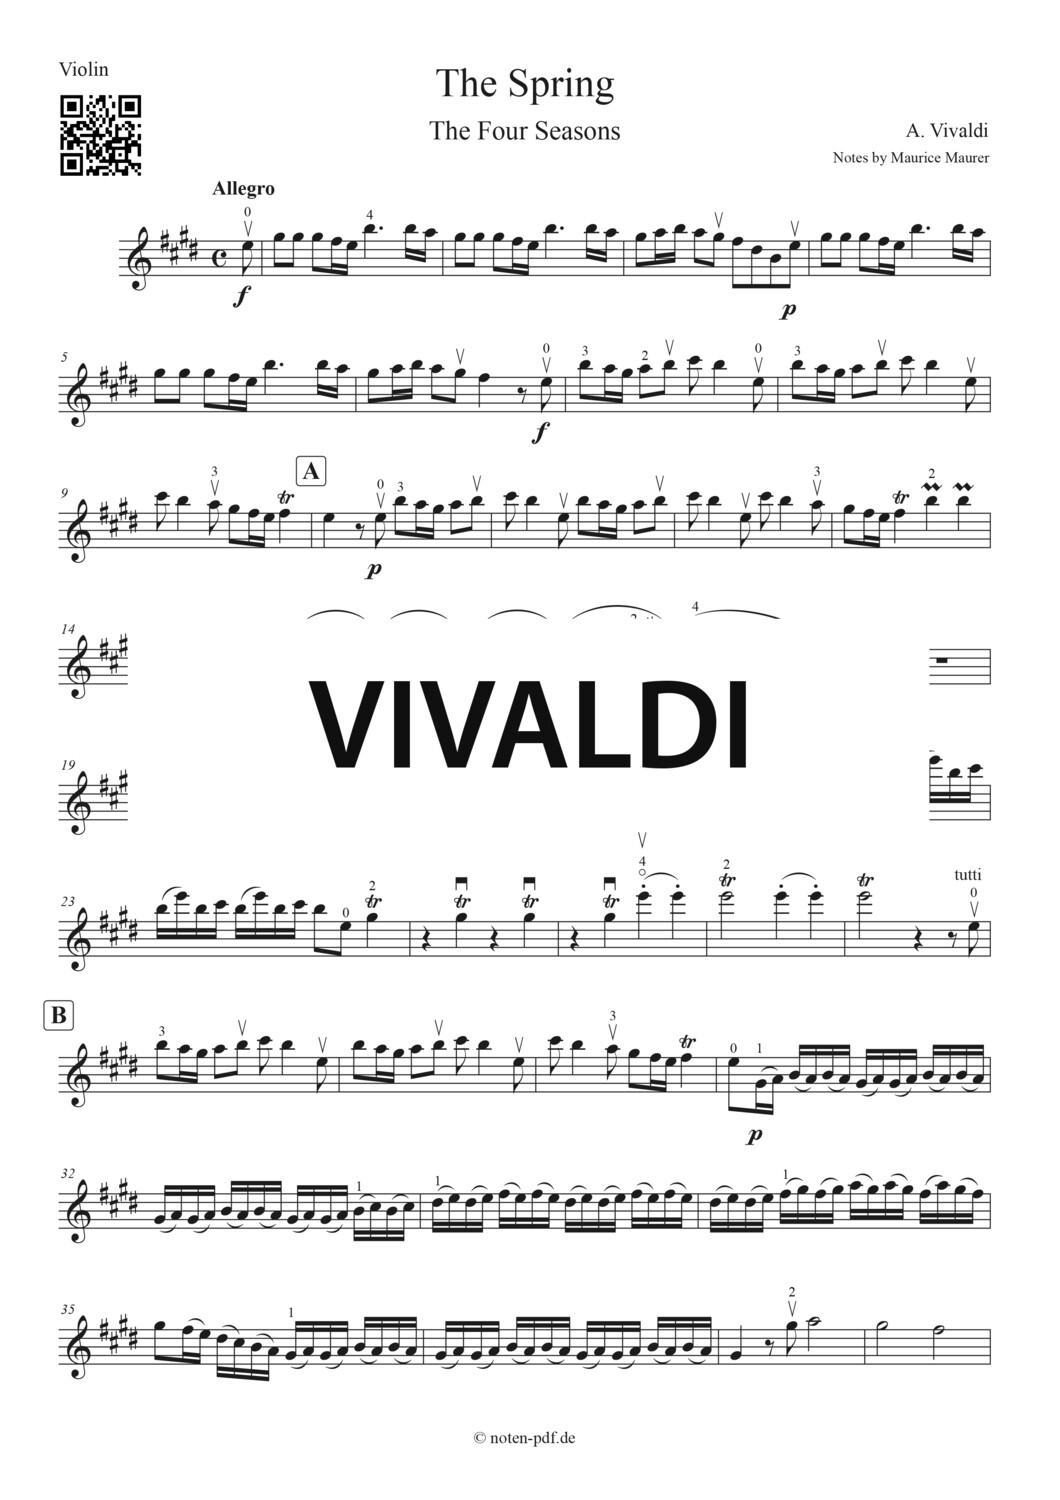 Vivaldi: The Spring from "The Four Seasons" - 1. Movement + MP3